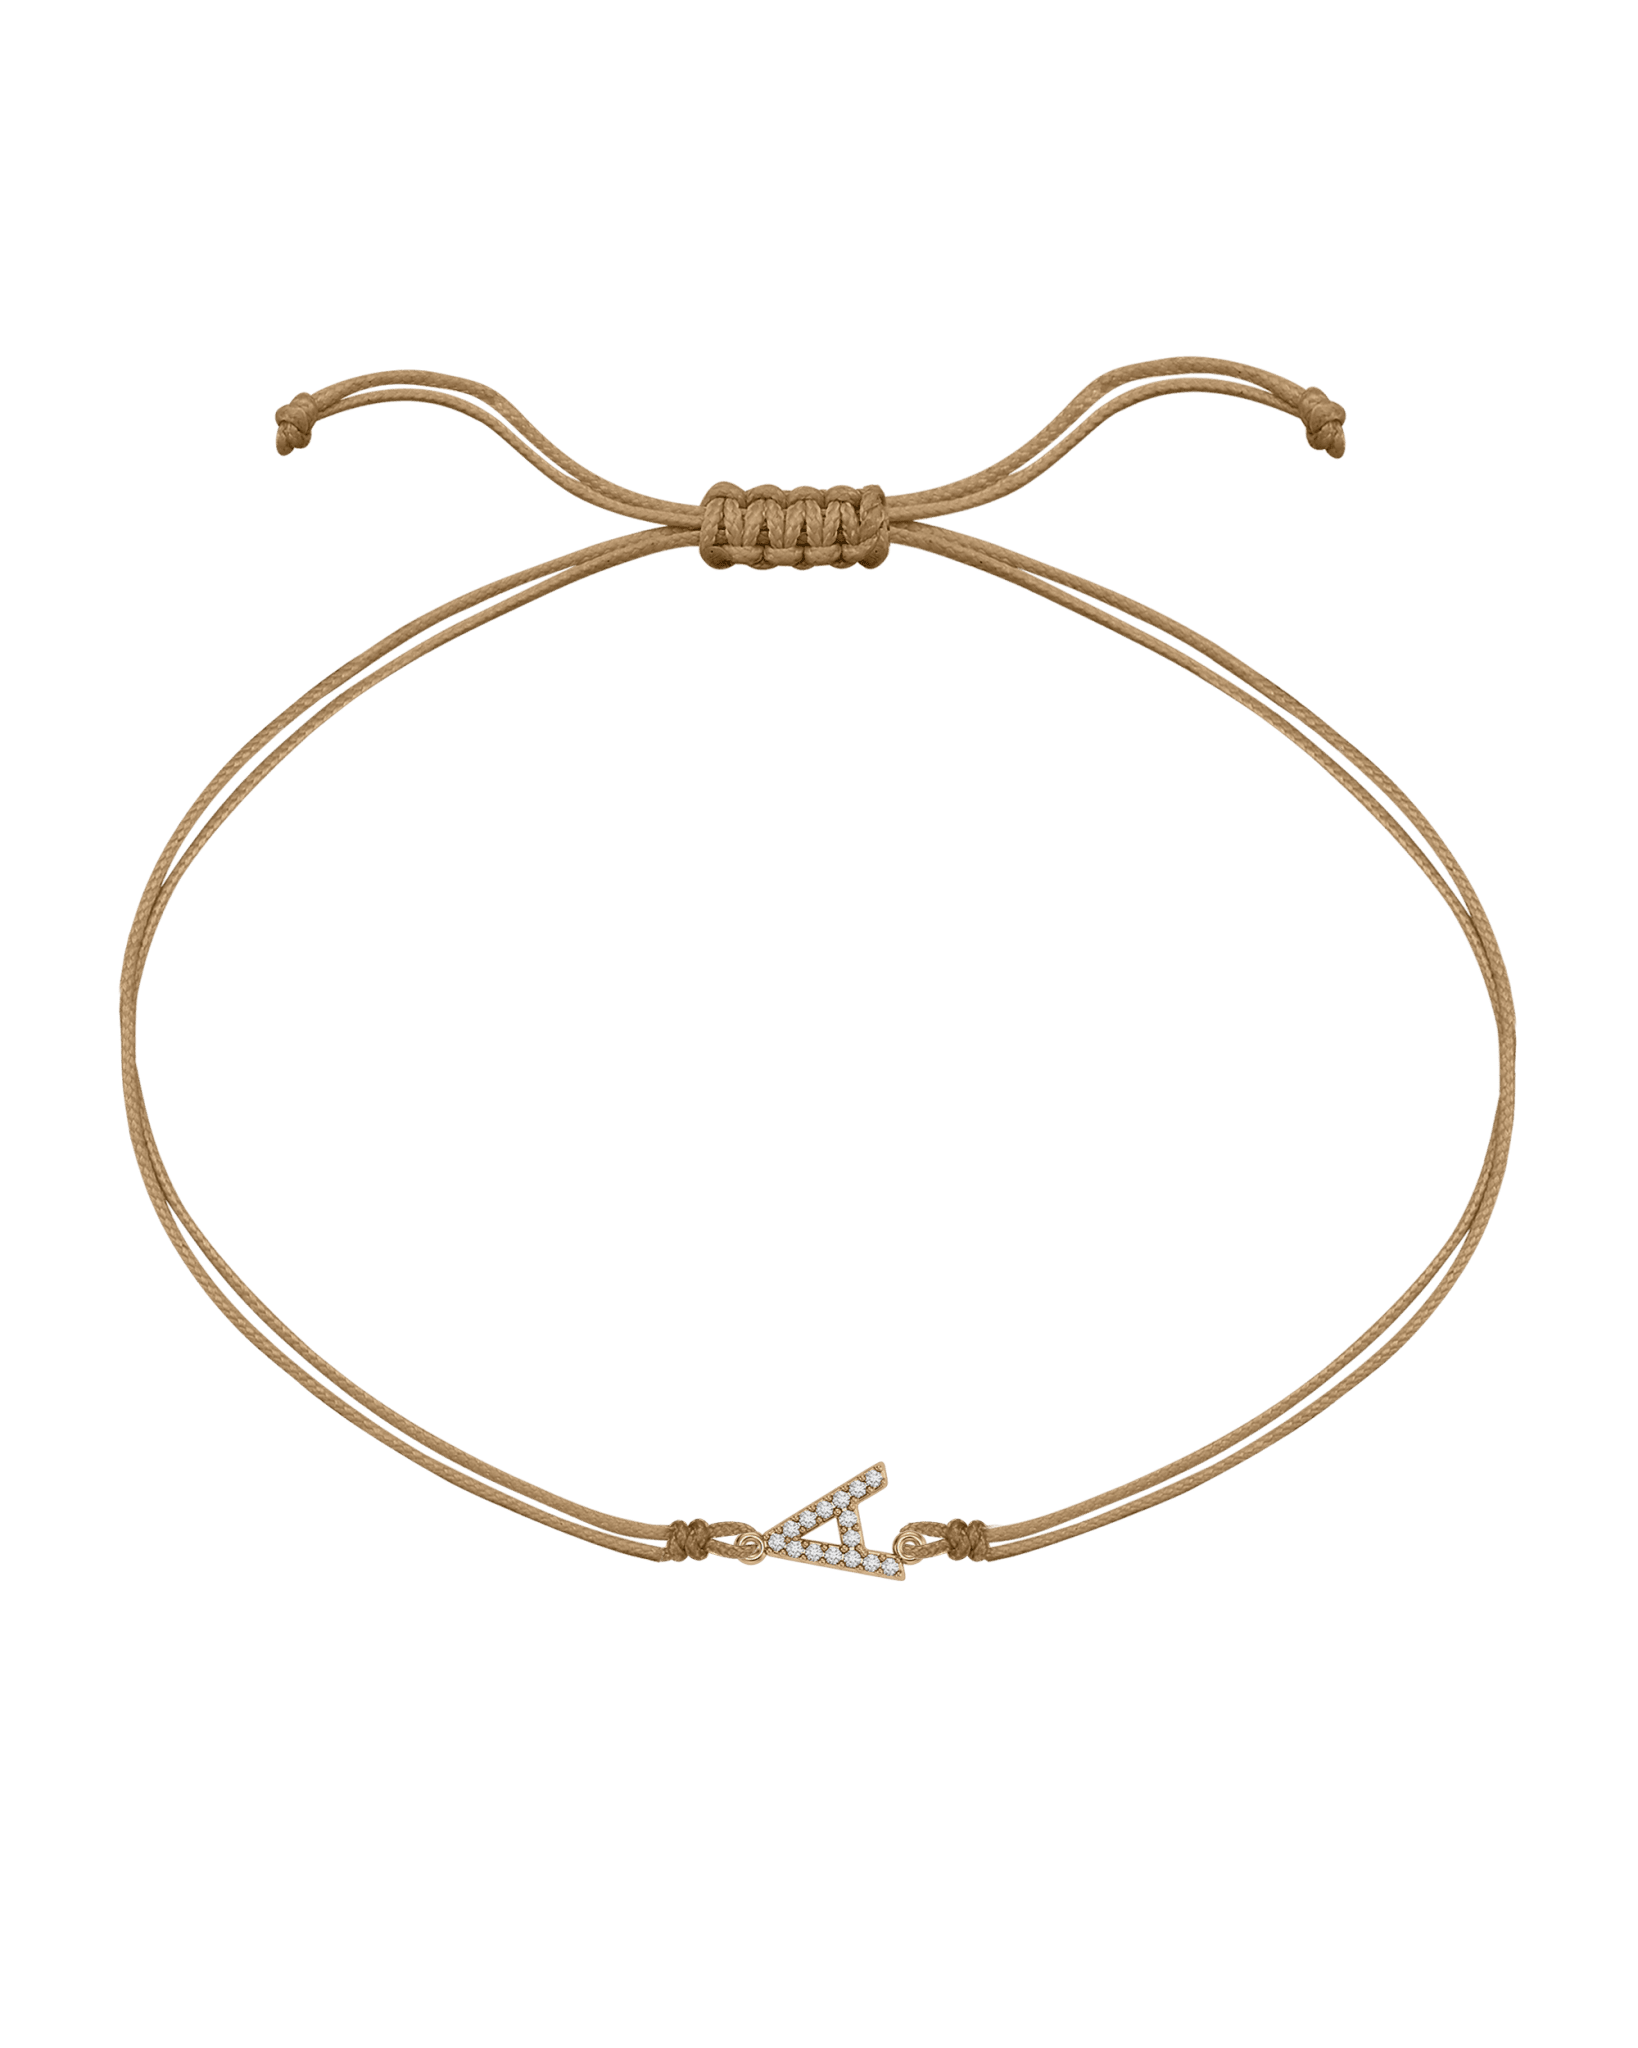 Paved Diamond Initial String of Love - 14K Yellow Gold Bracelet 14K Solid Gold Camel 